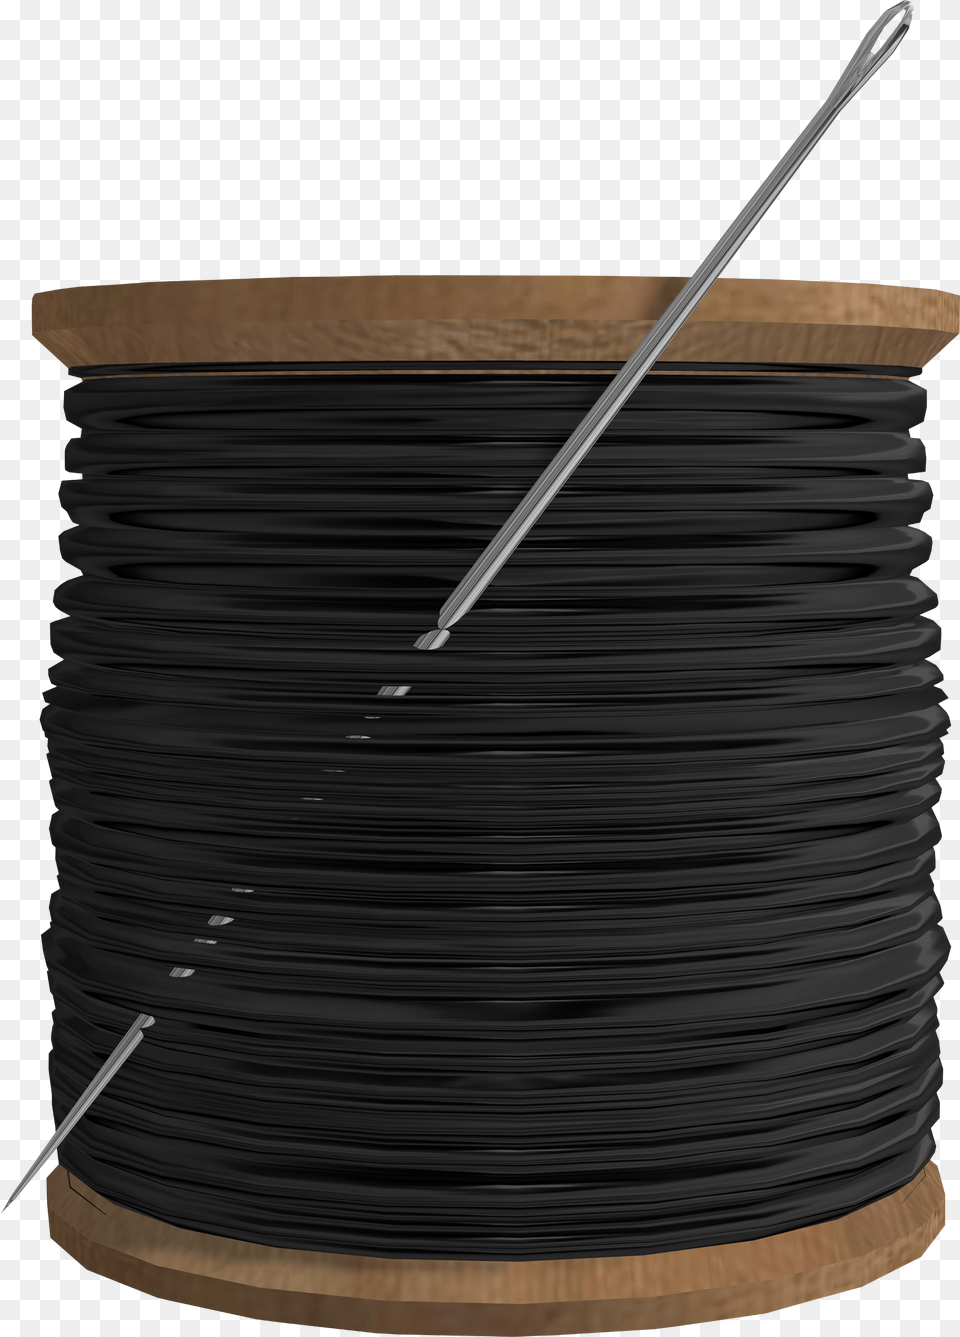 Thread, Wire, Coil, Spiral, Sword Png